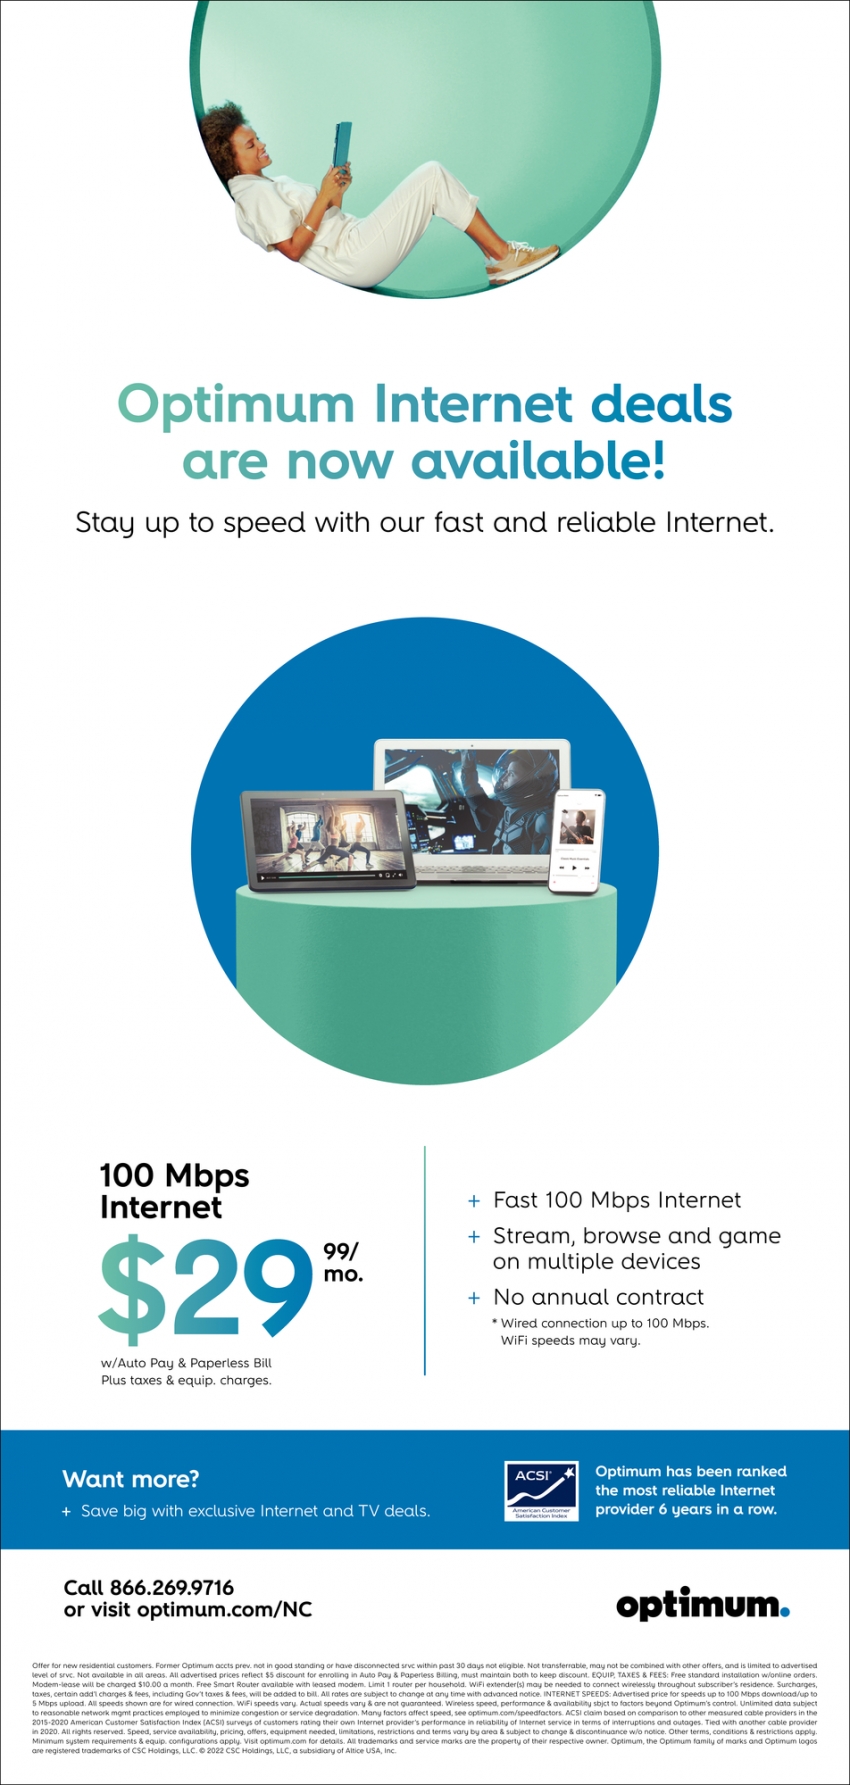 Optimum Internet Deals Are Now Available